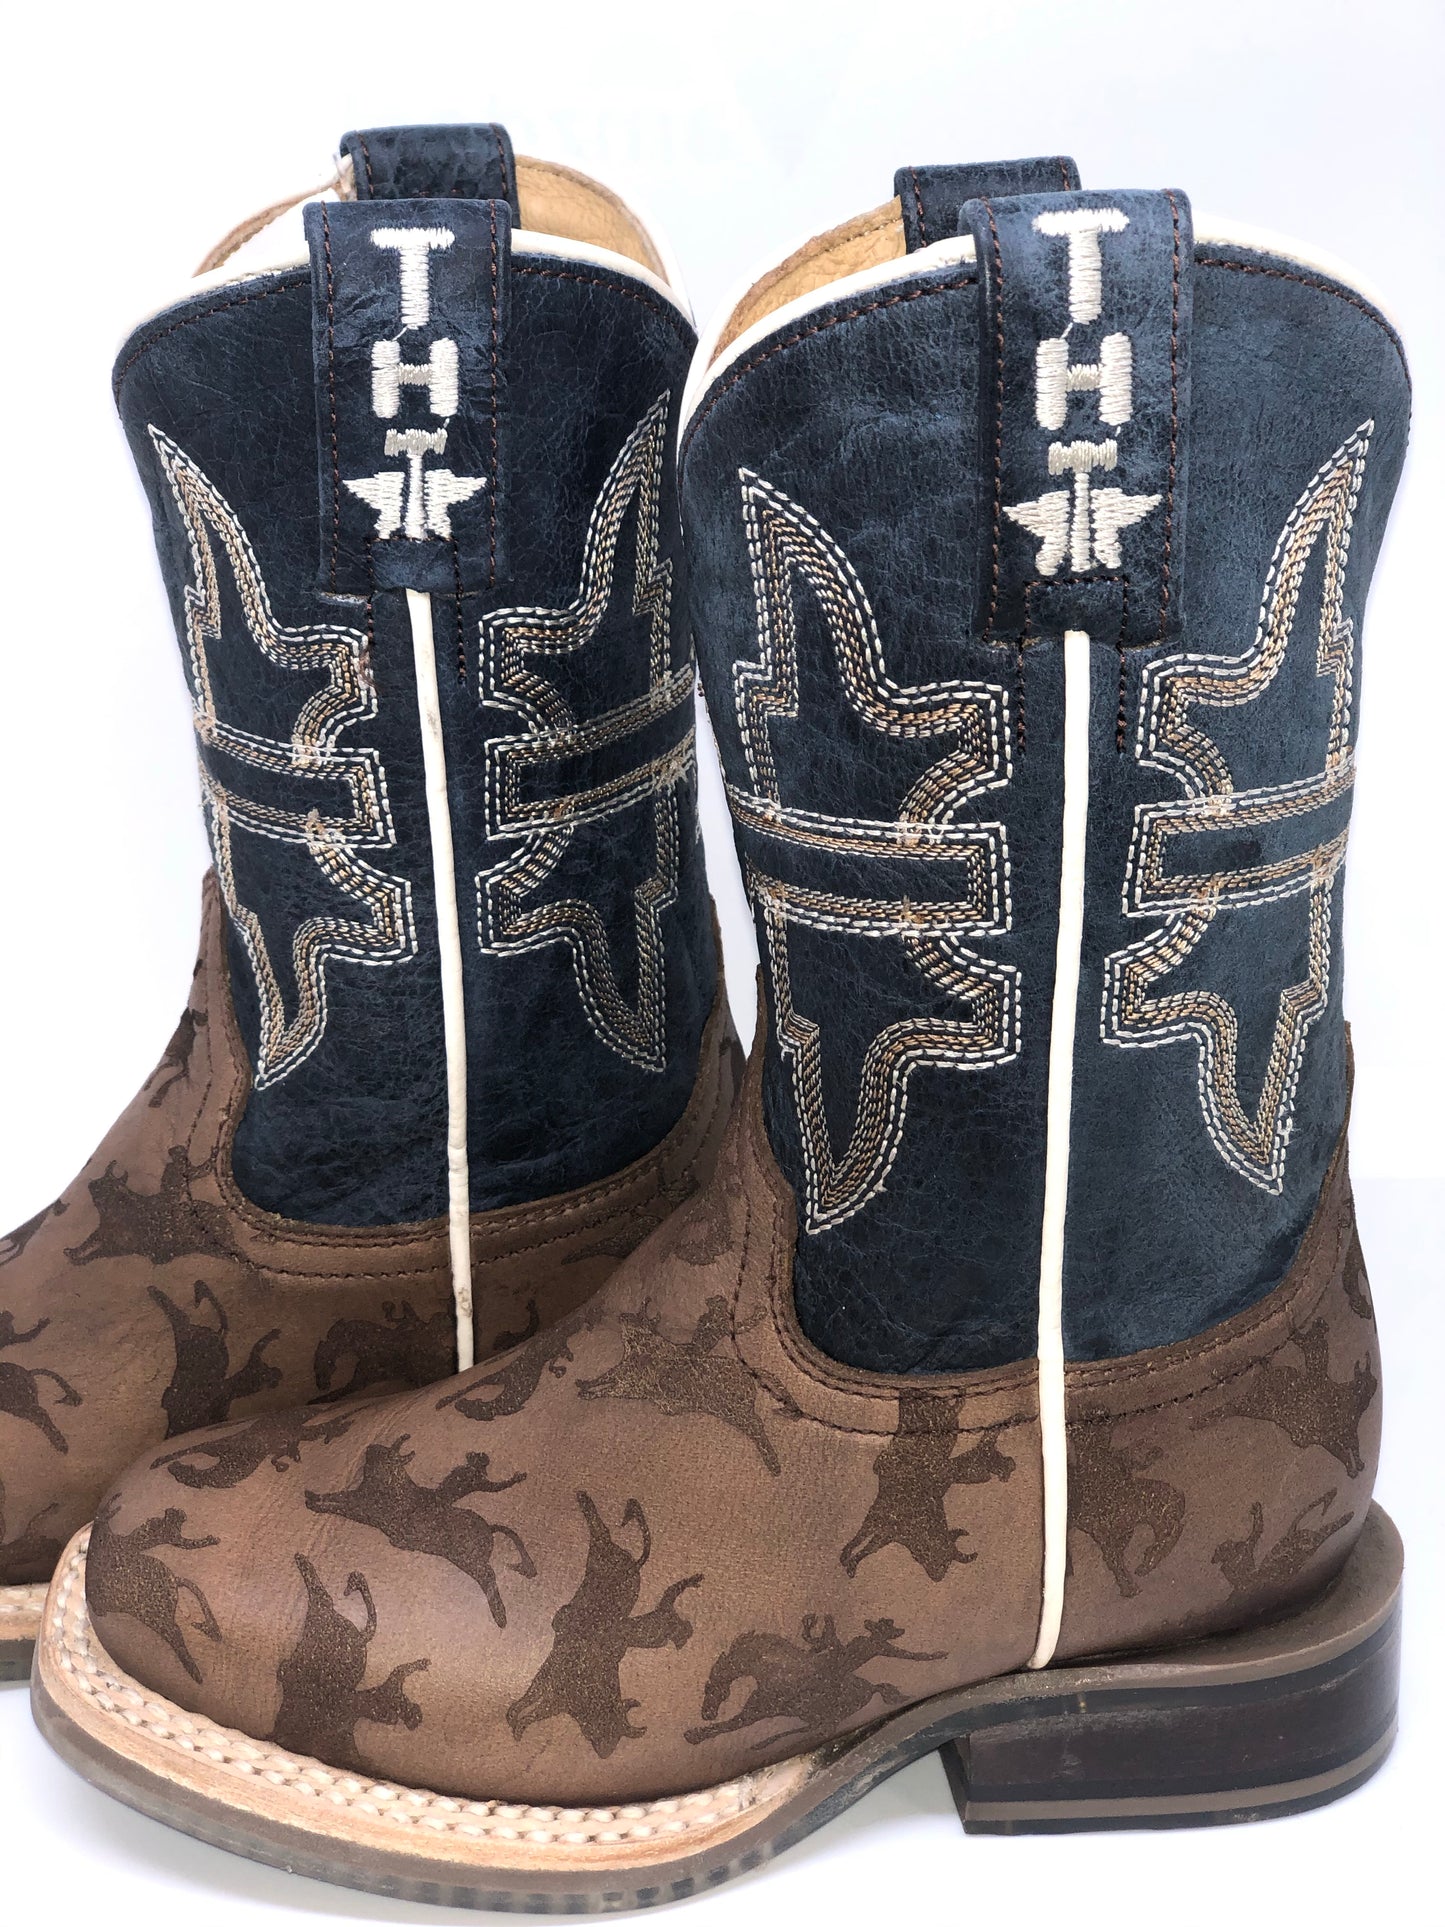 Tin Haul Kid's Rough Stock Boots w/Rodeo Poster Sole (0815)